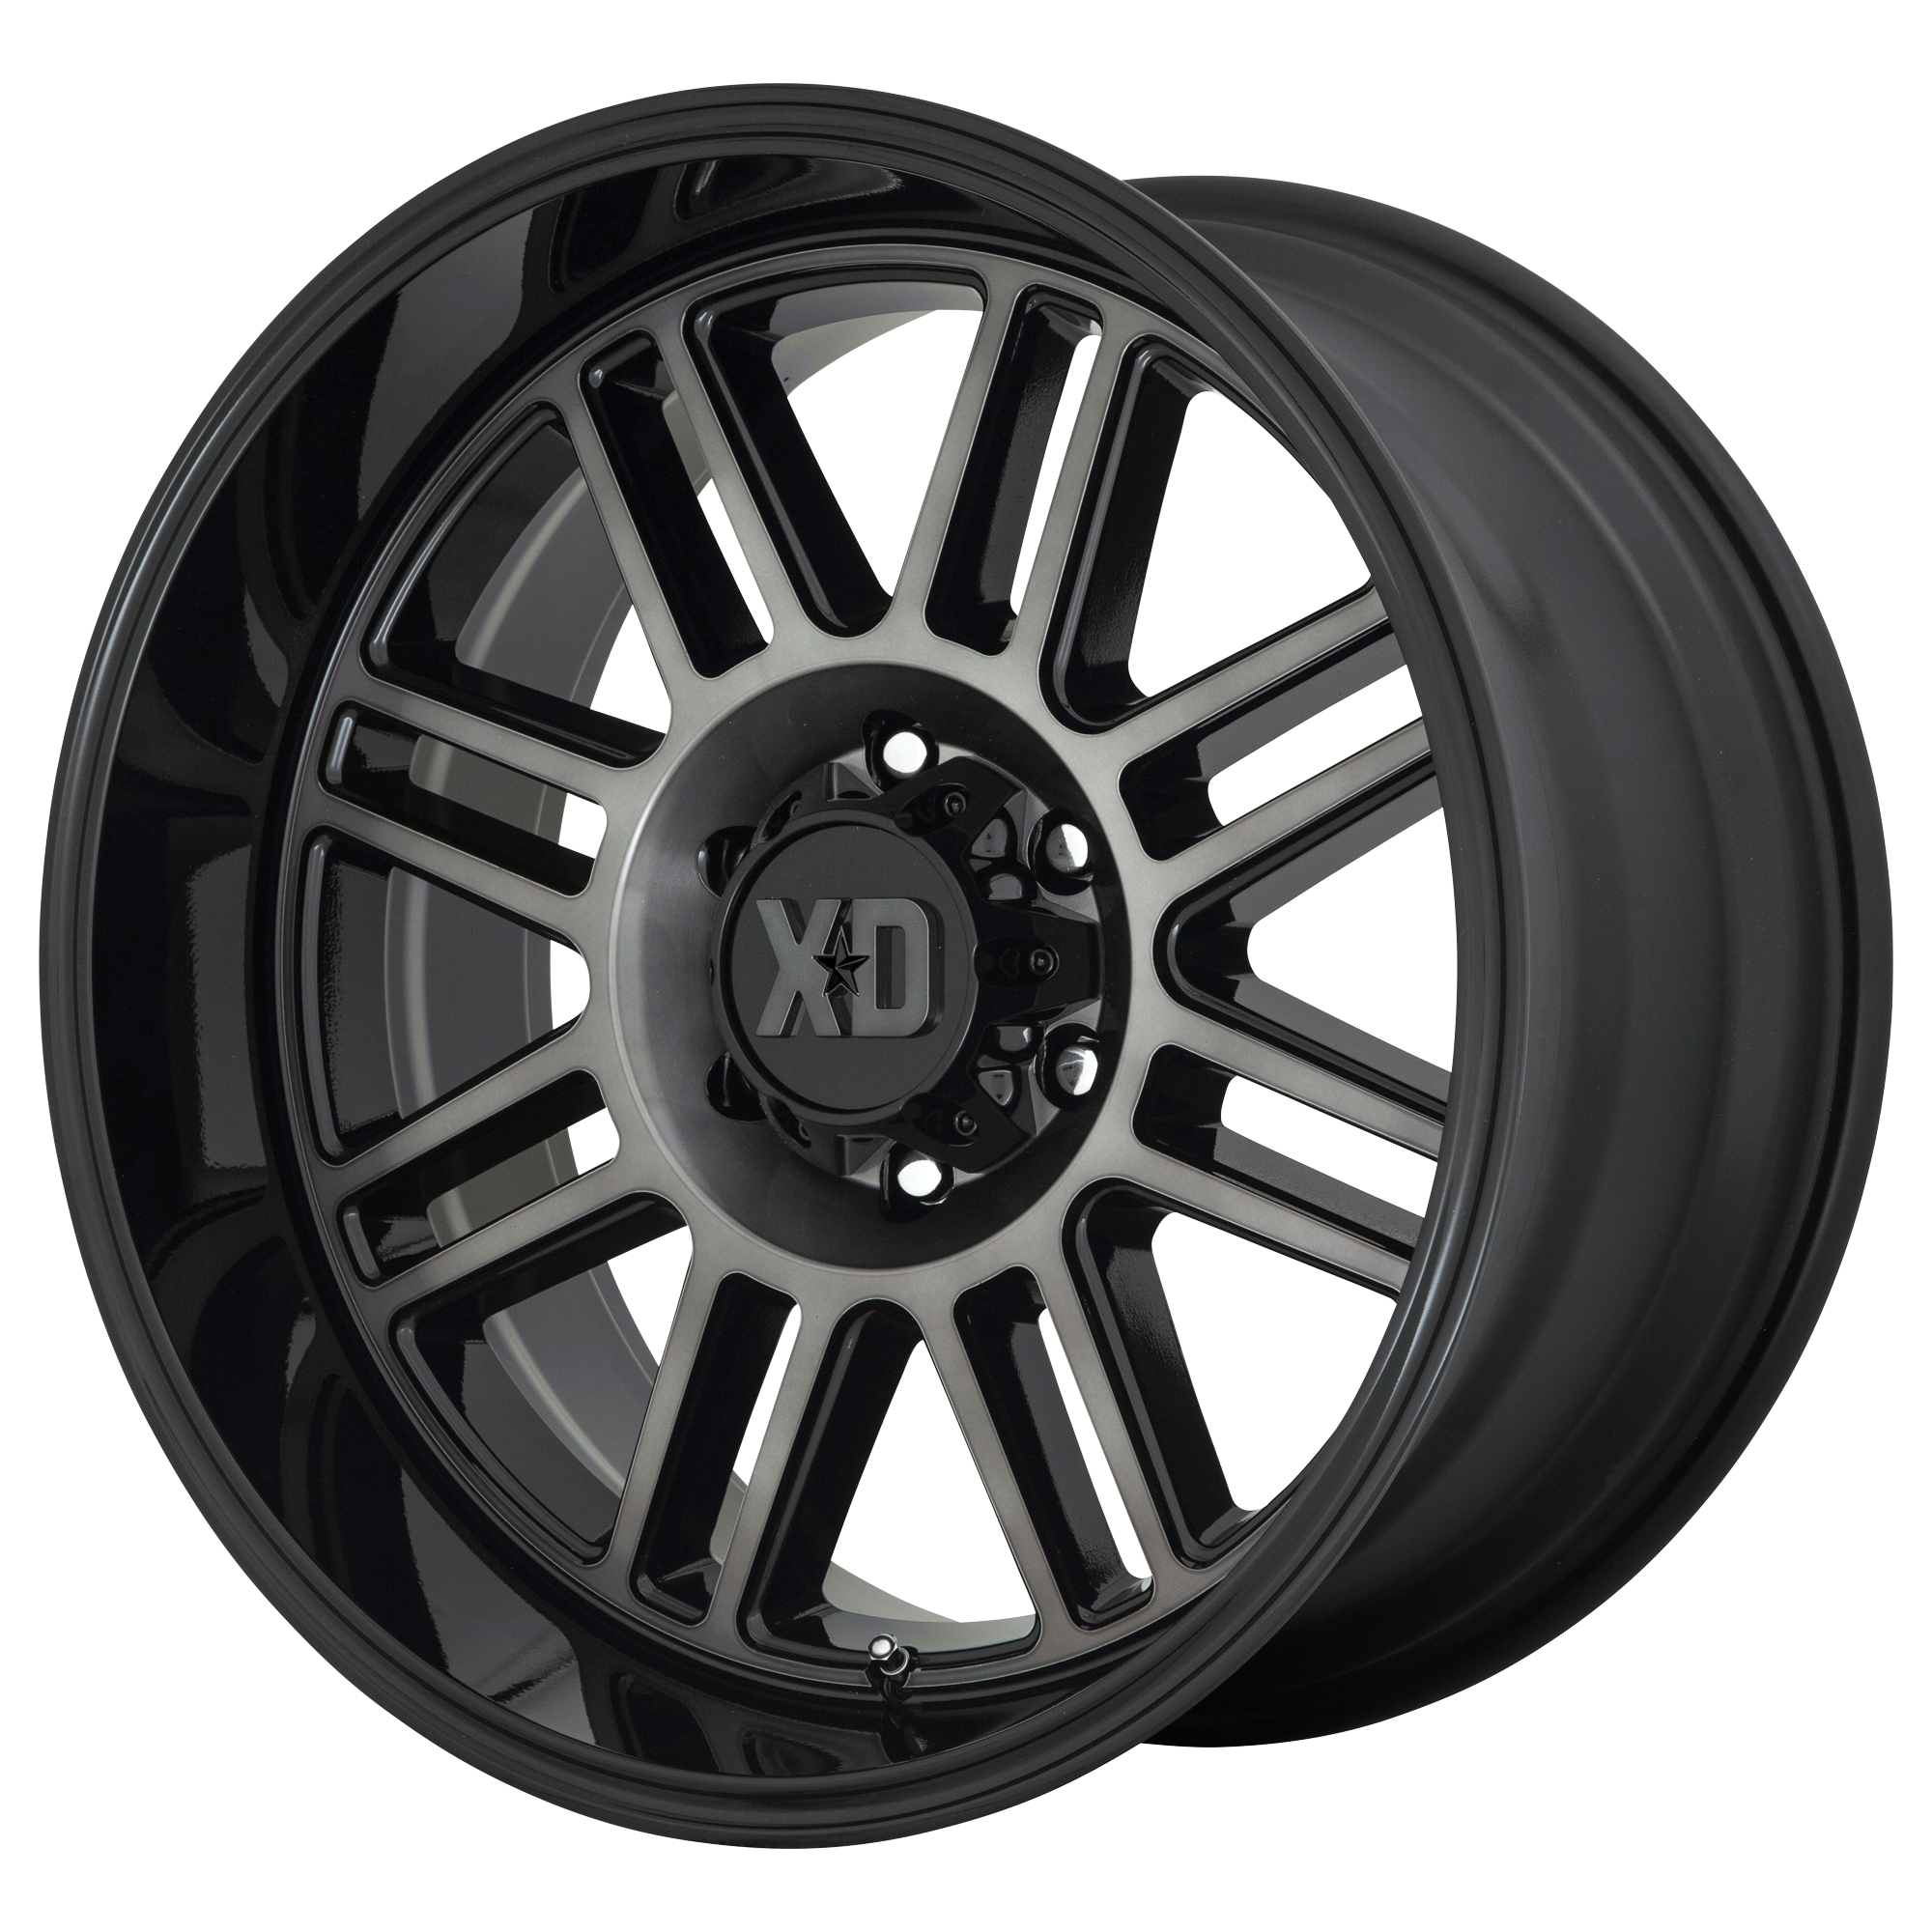 CAGE 20x9 6x135.00 GLOSS BLACK W/ GRAY TINT (18 mm) - Tires and Engine Performance